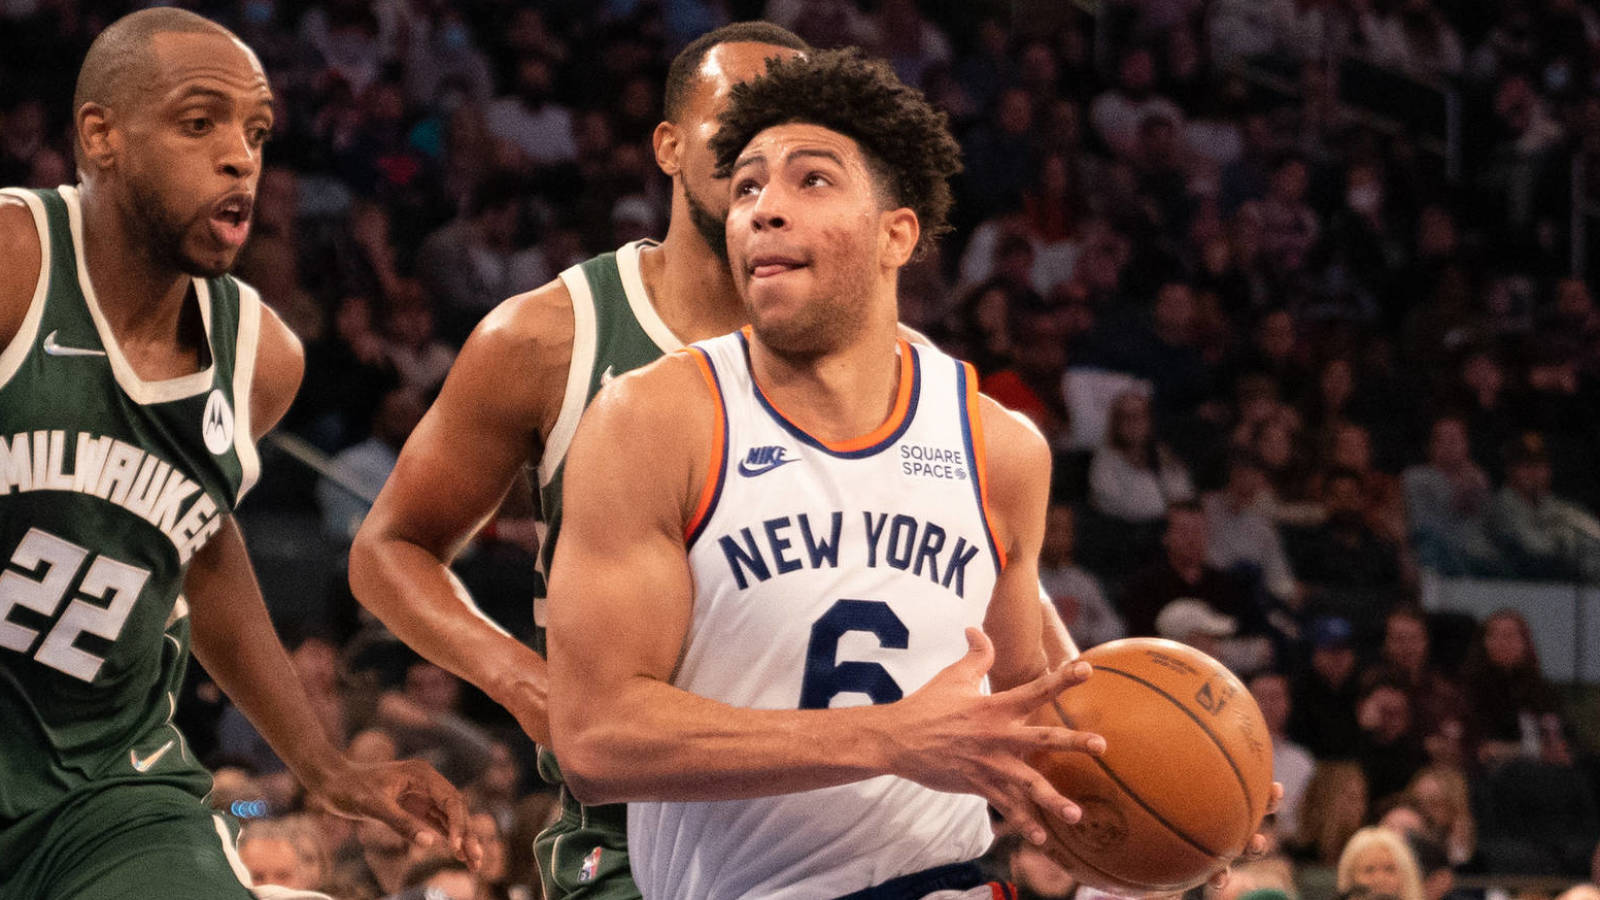 Knicks rookie Quentin Grimes out vs. Warriors due to COVID-19 protocols, one game after setting record